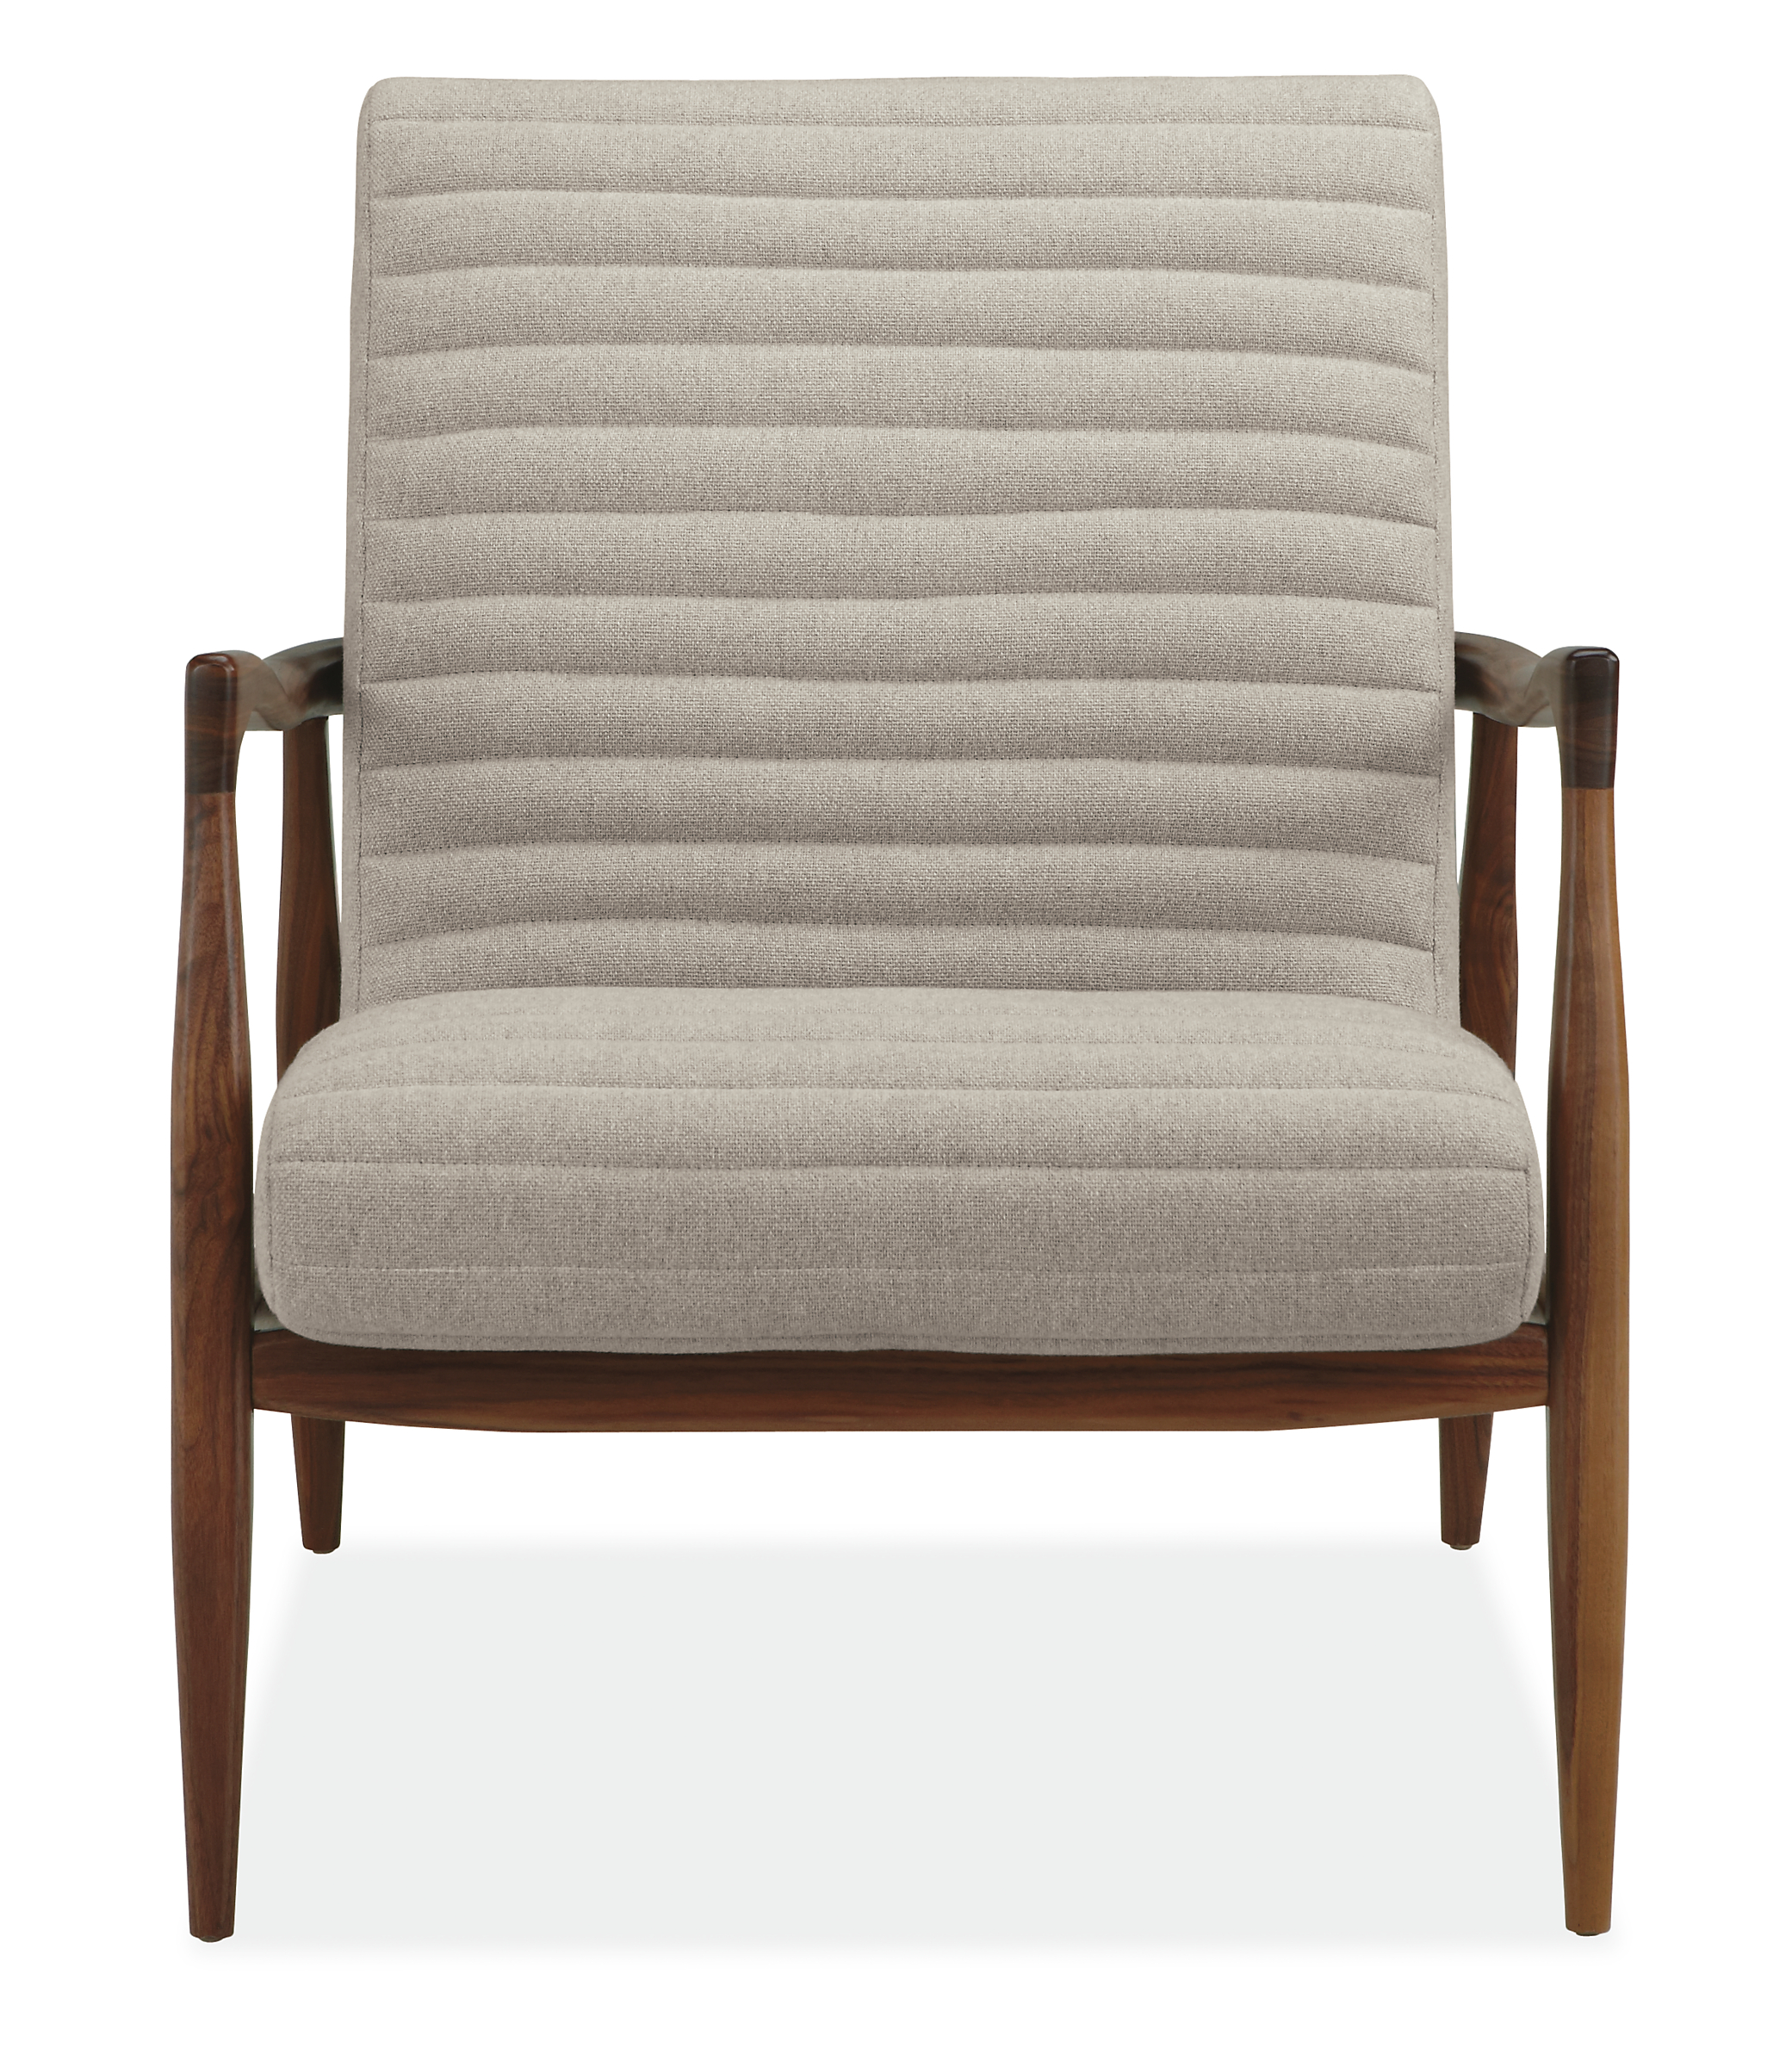 Front view of Callan Chair in Trip Fabric with Walnut Base.